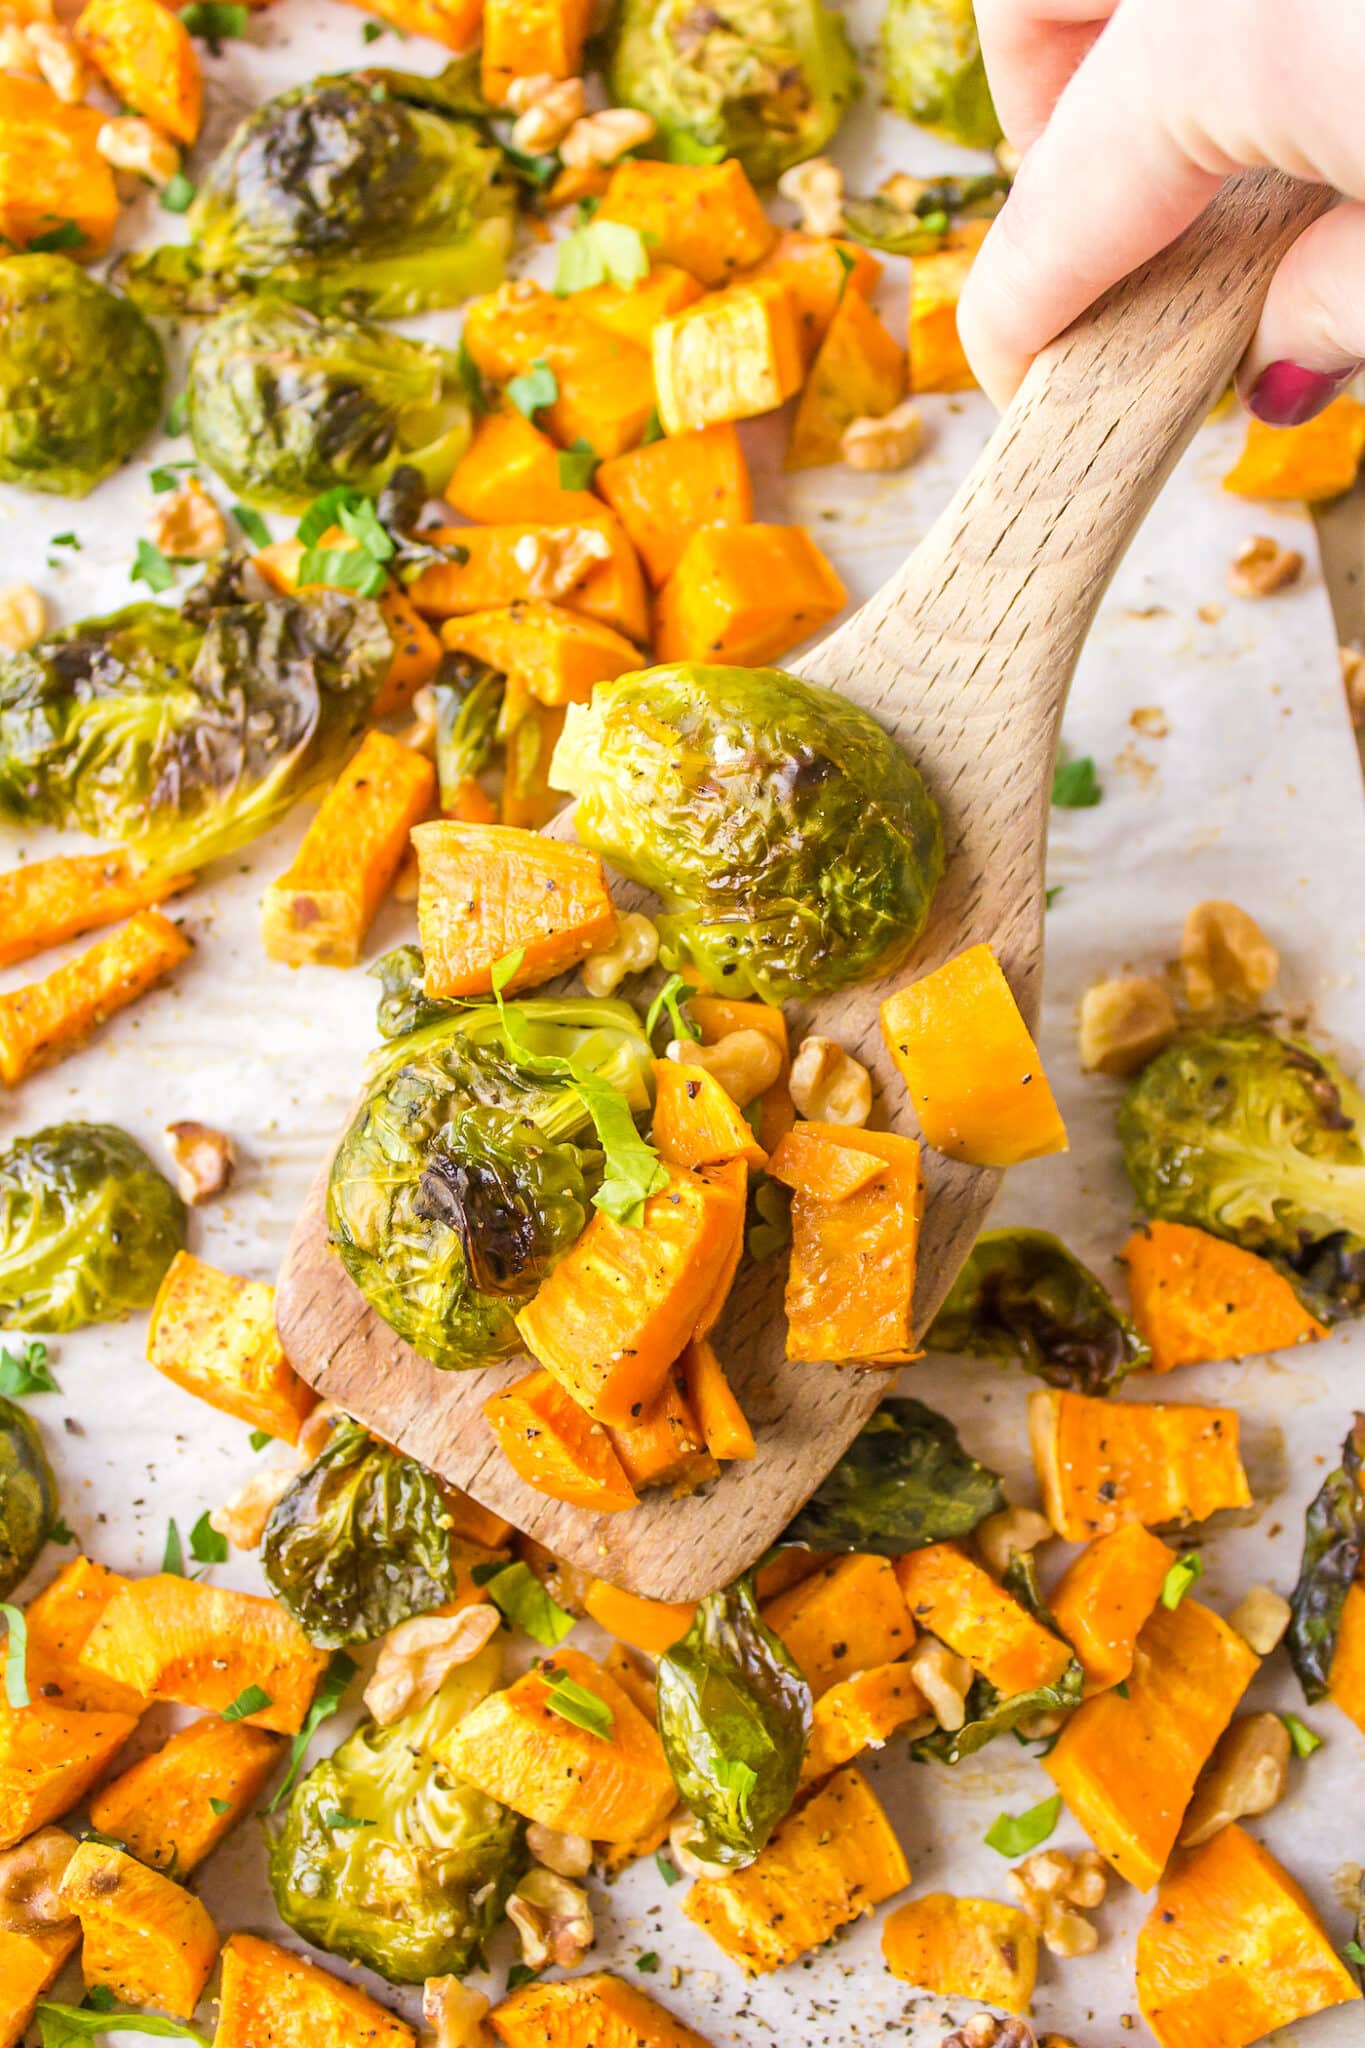 Roasted brussels sprouts and sweet potatoes on a baking sheet.